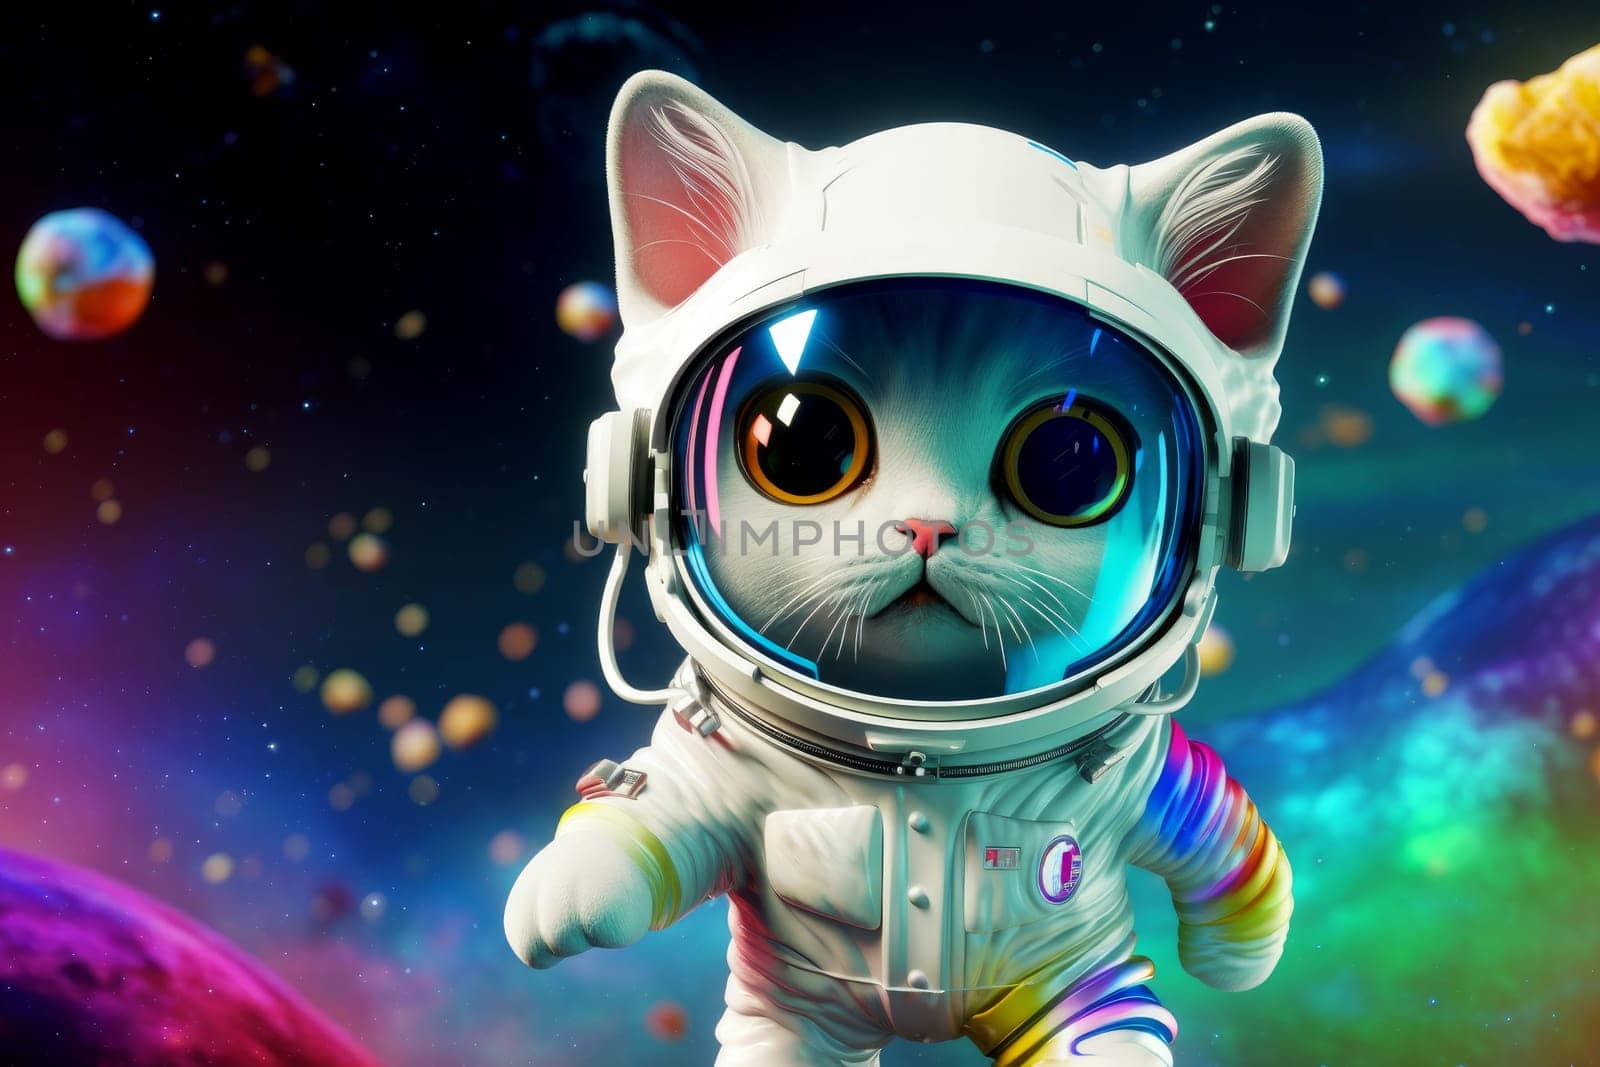 Cute cat with big eyes in space. Cute animal art by ylivdesign